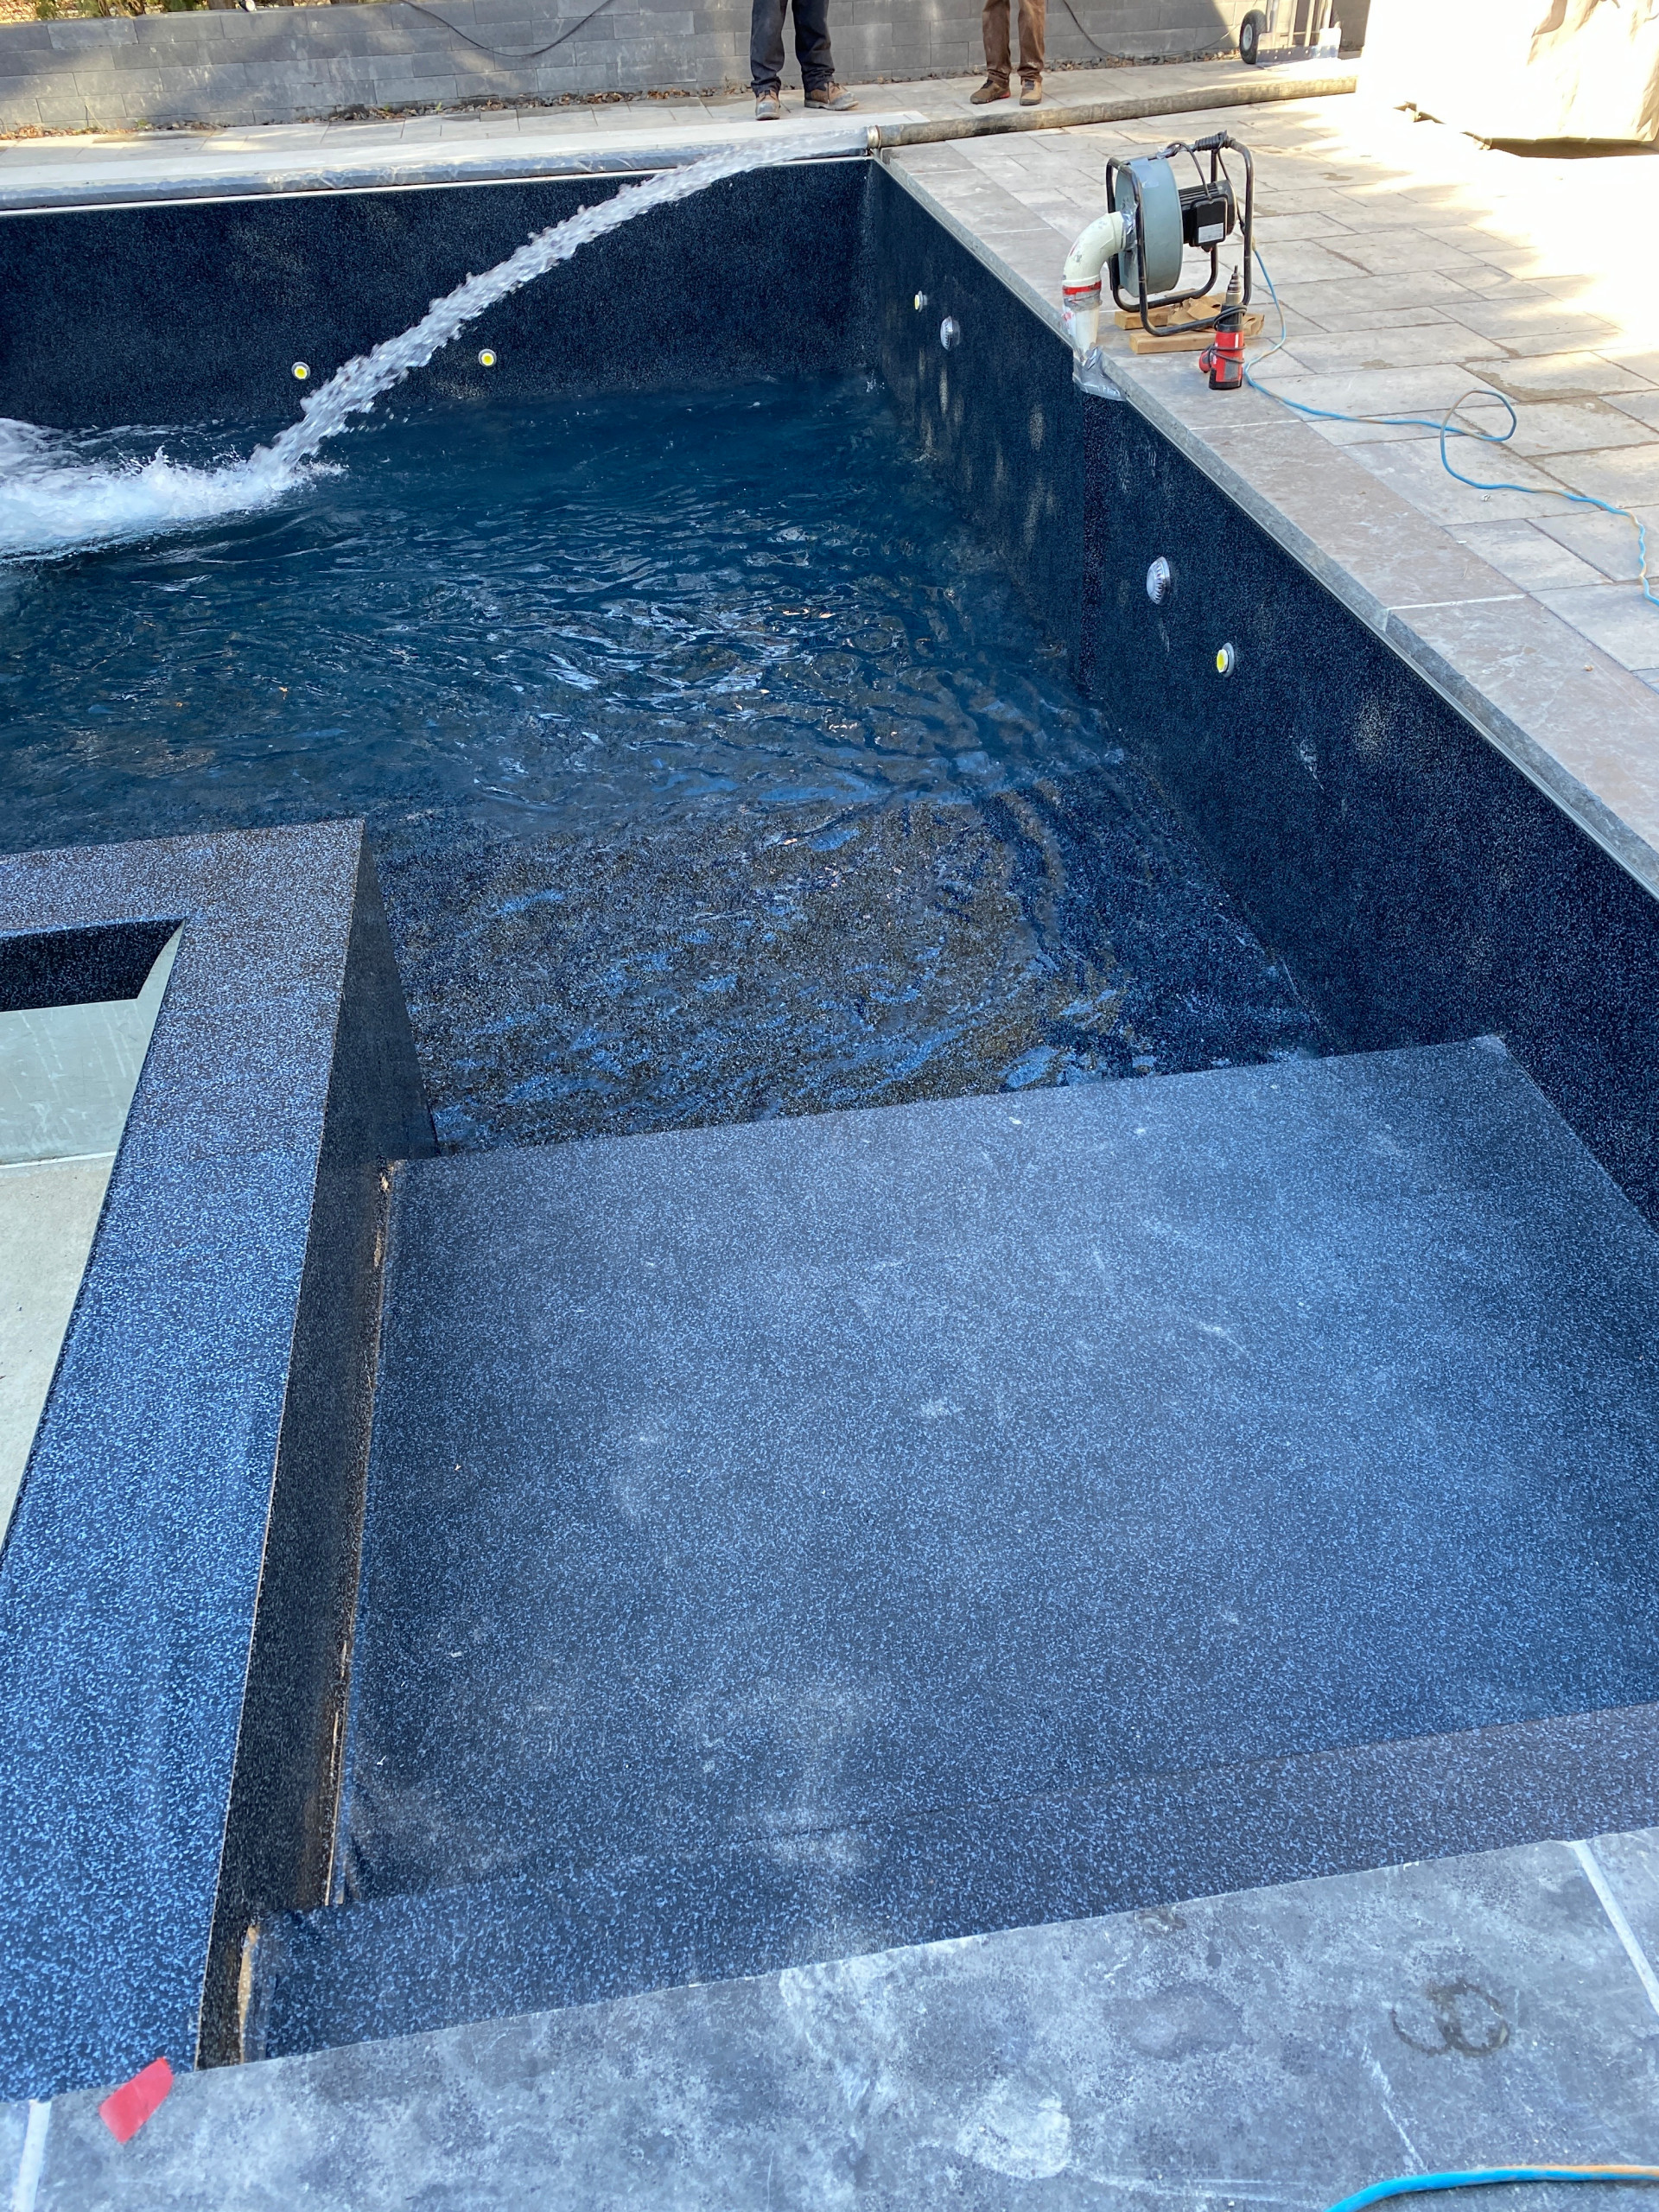 South Mississauga Cabana Kitchen Pool Project